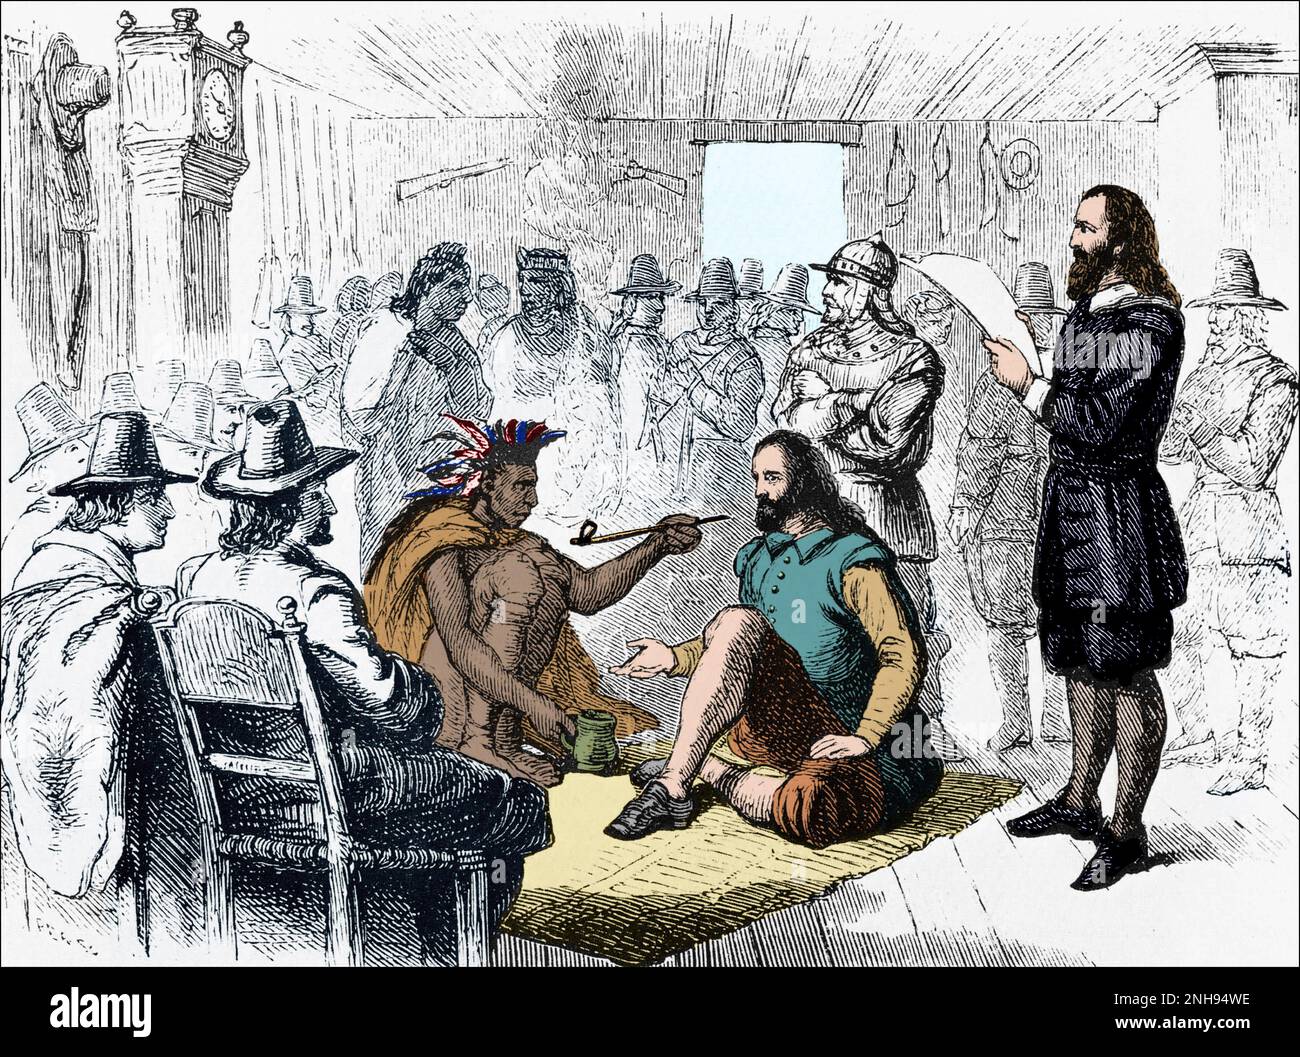 The Wampanoag leader Massasoit (c.1581-1661) smoking a peace pipe with the Plymouth governor John Carver after signing a treaty in 1621. Engraving from before 1898. Colorized. Stock Photo